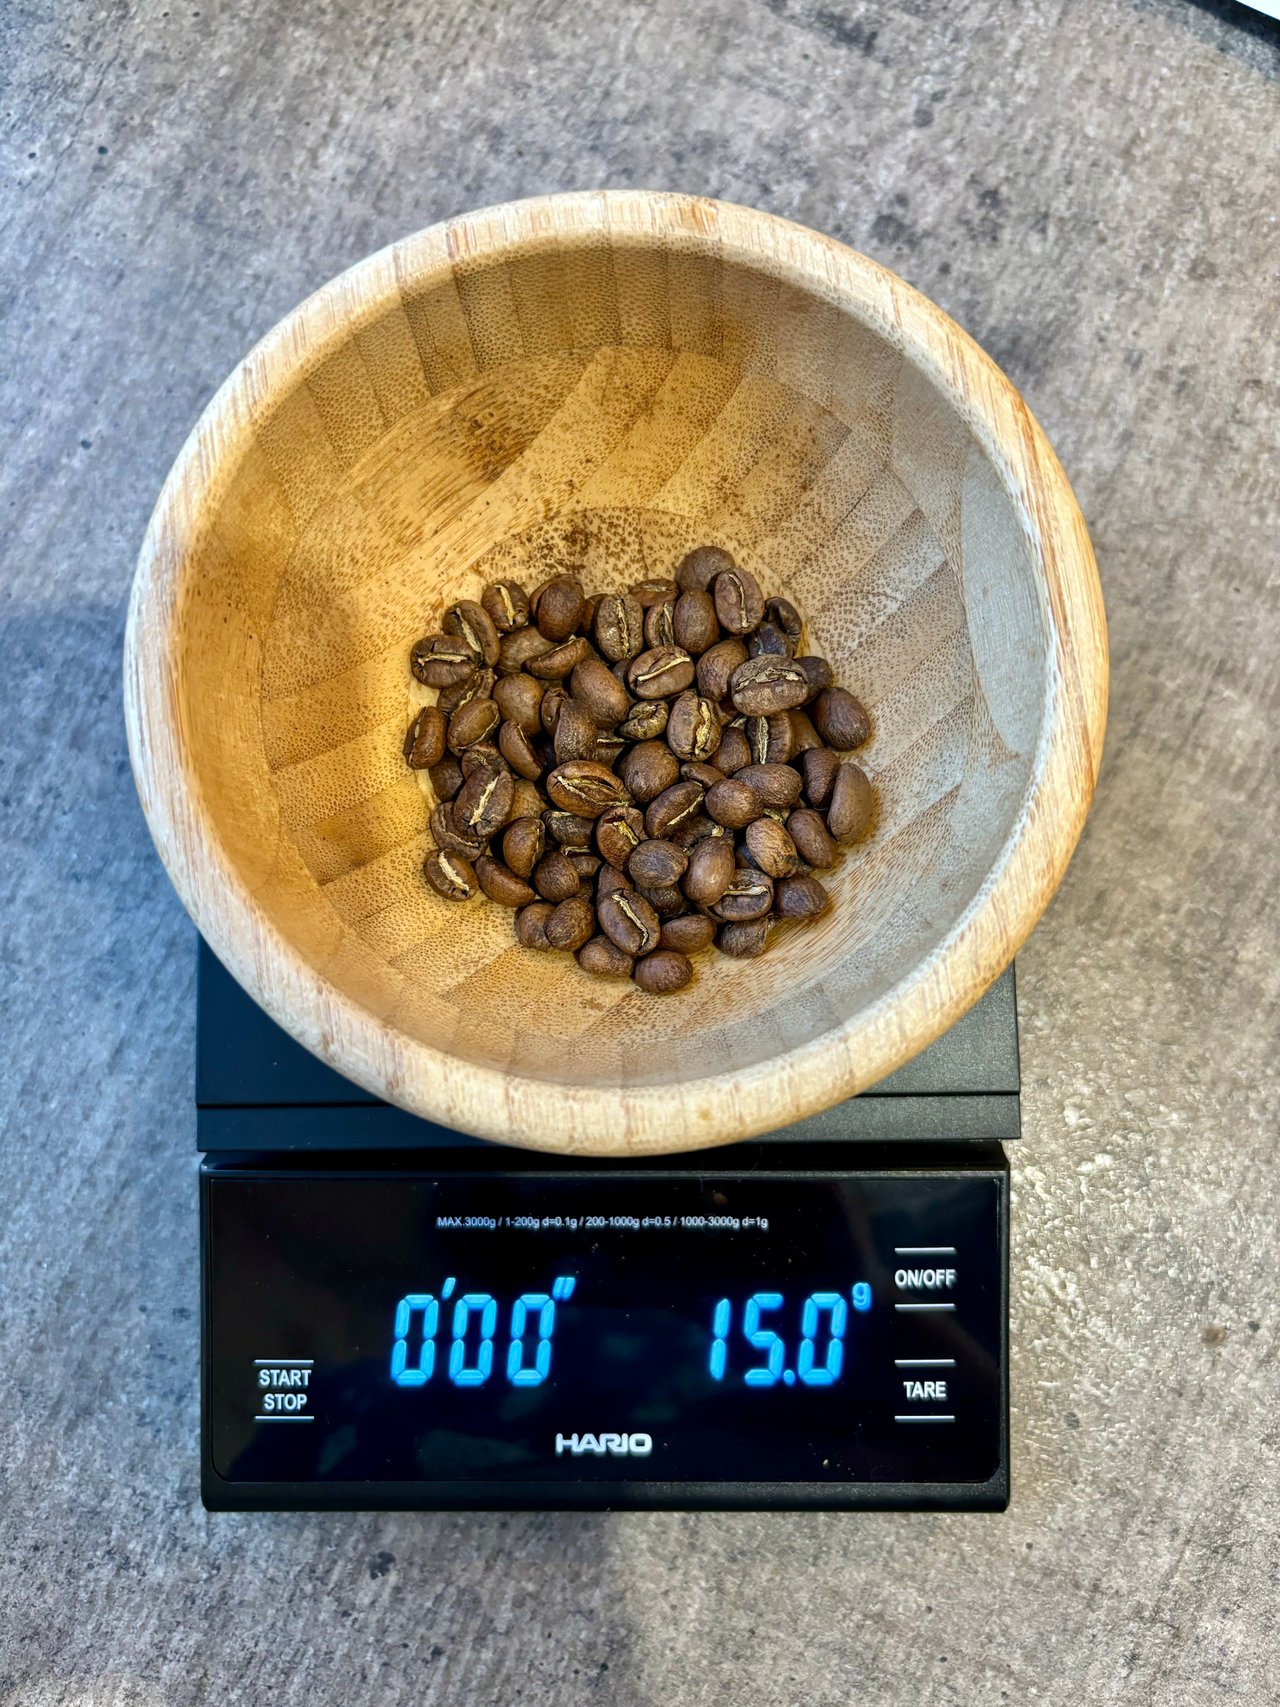 My new scale in action with another Italian barista champion coffee.